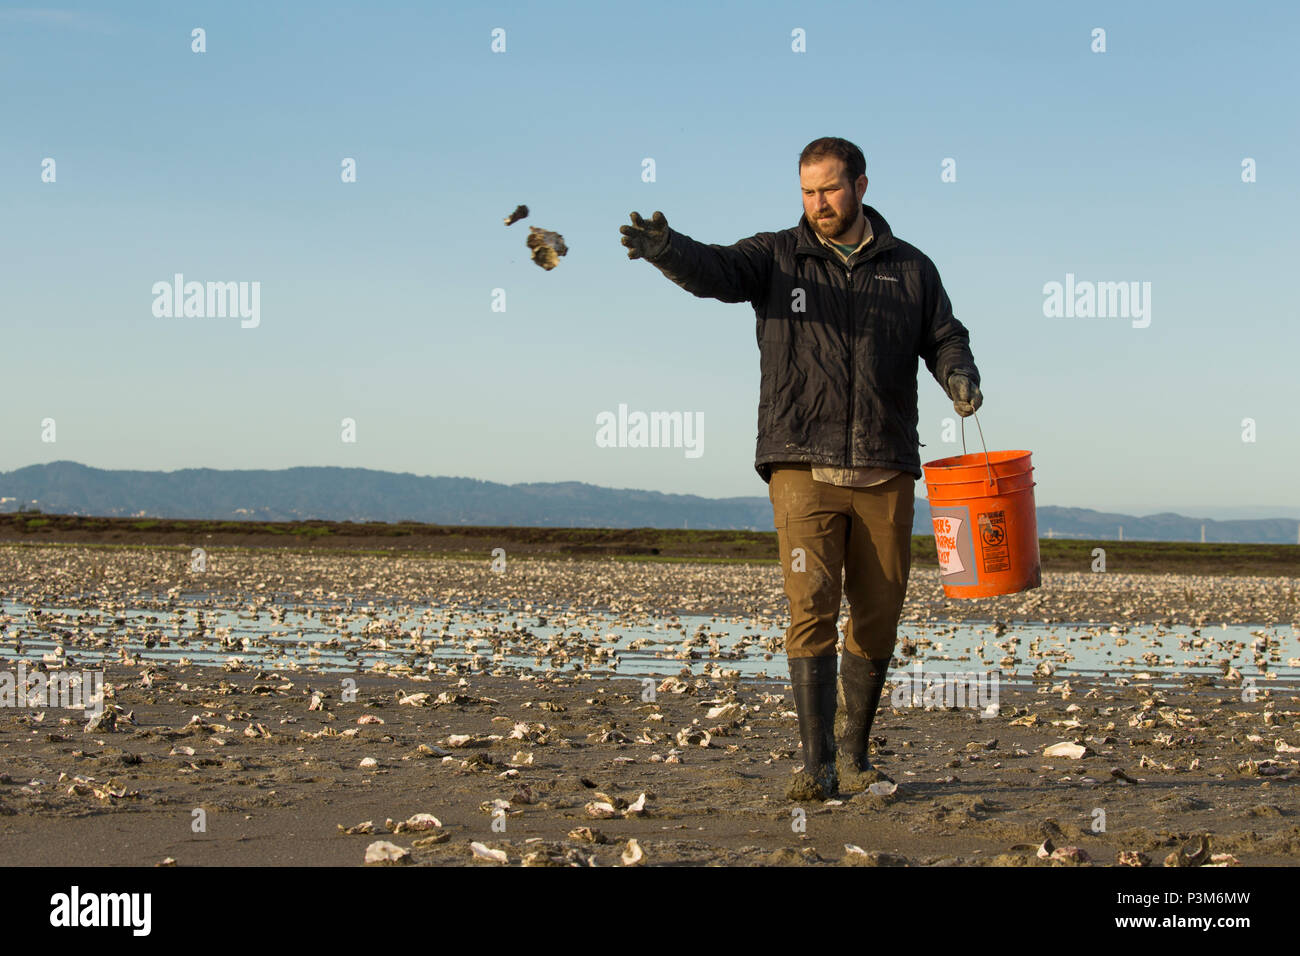 Snowy Plover (Charadrius nivosus) biologist, Ben Pearl, spreading oystershells in salt pond, which snowy plovers can use for camouflage, Eden Landing Ecological Reserve, Union City, Bay Area, California Stock Photo